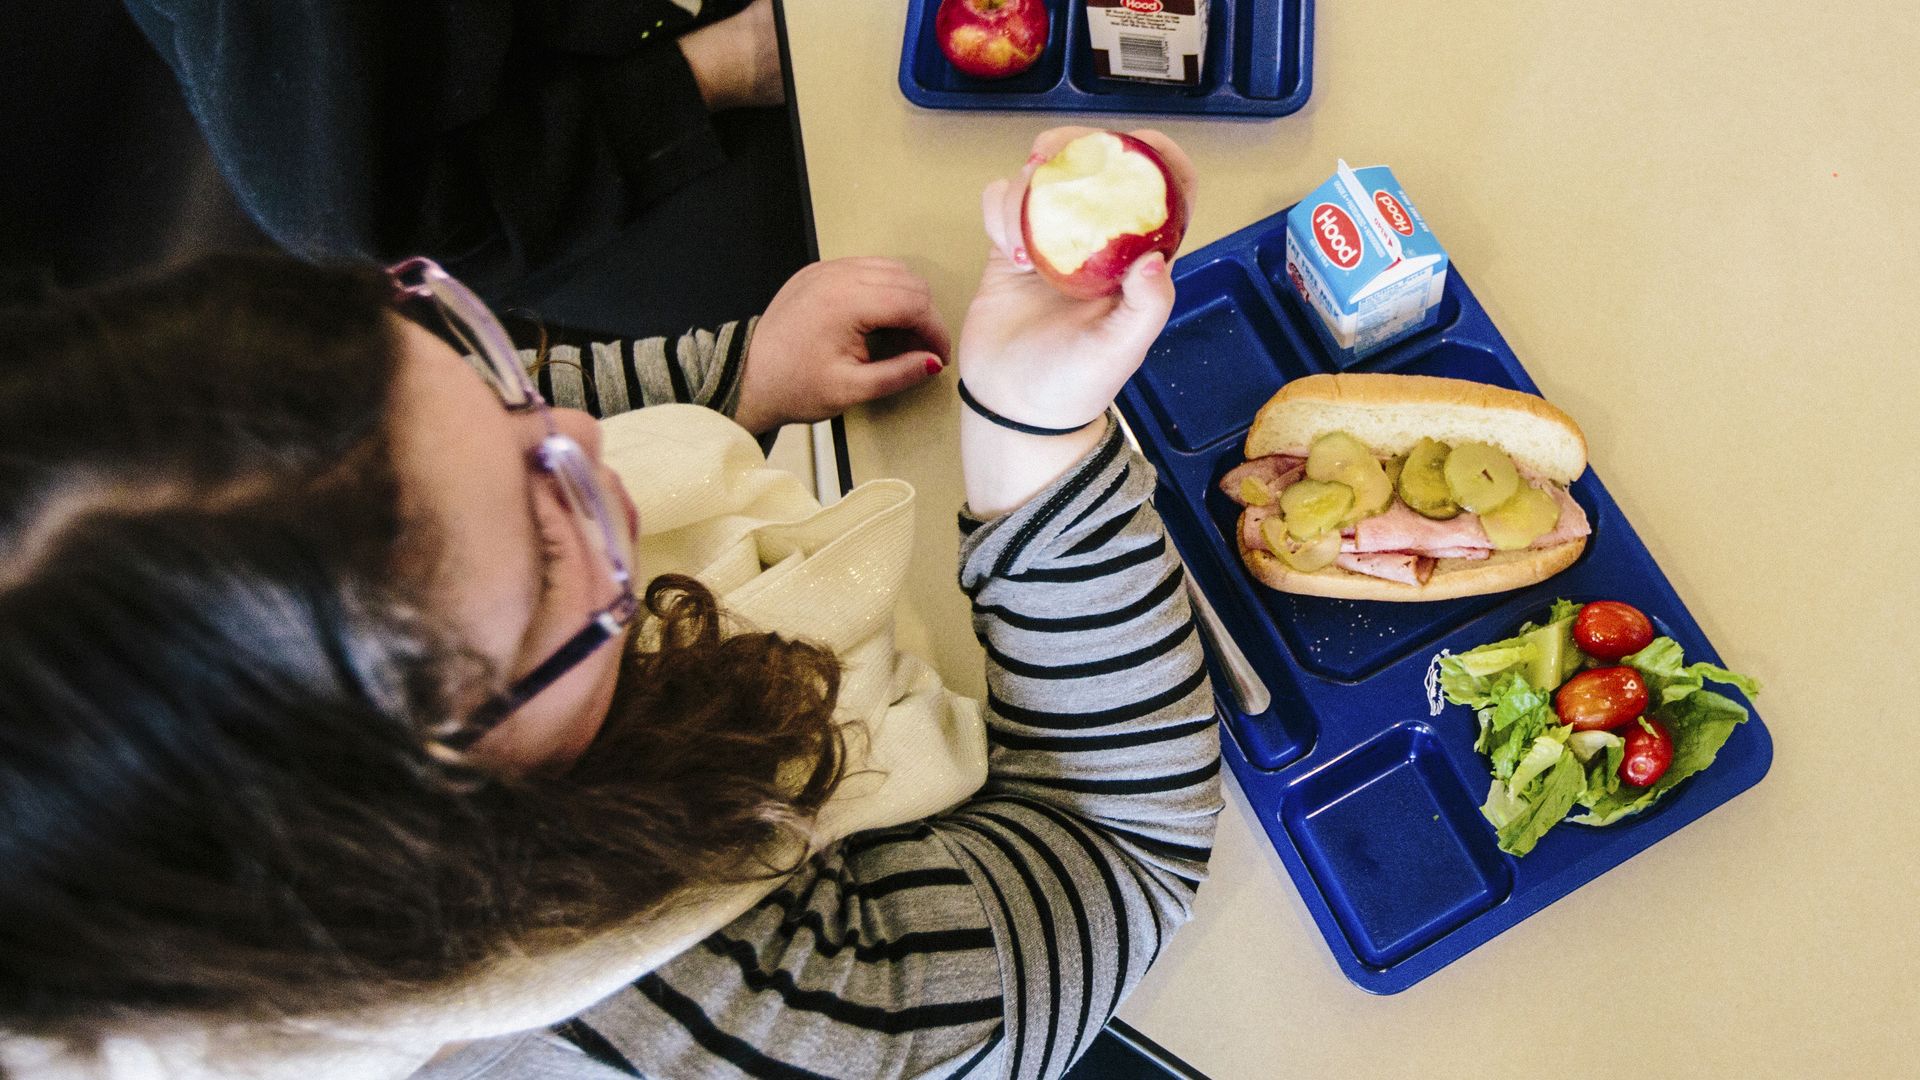 In this image, a student eats school lunch 